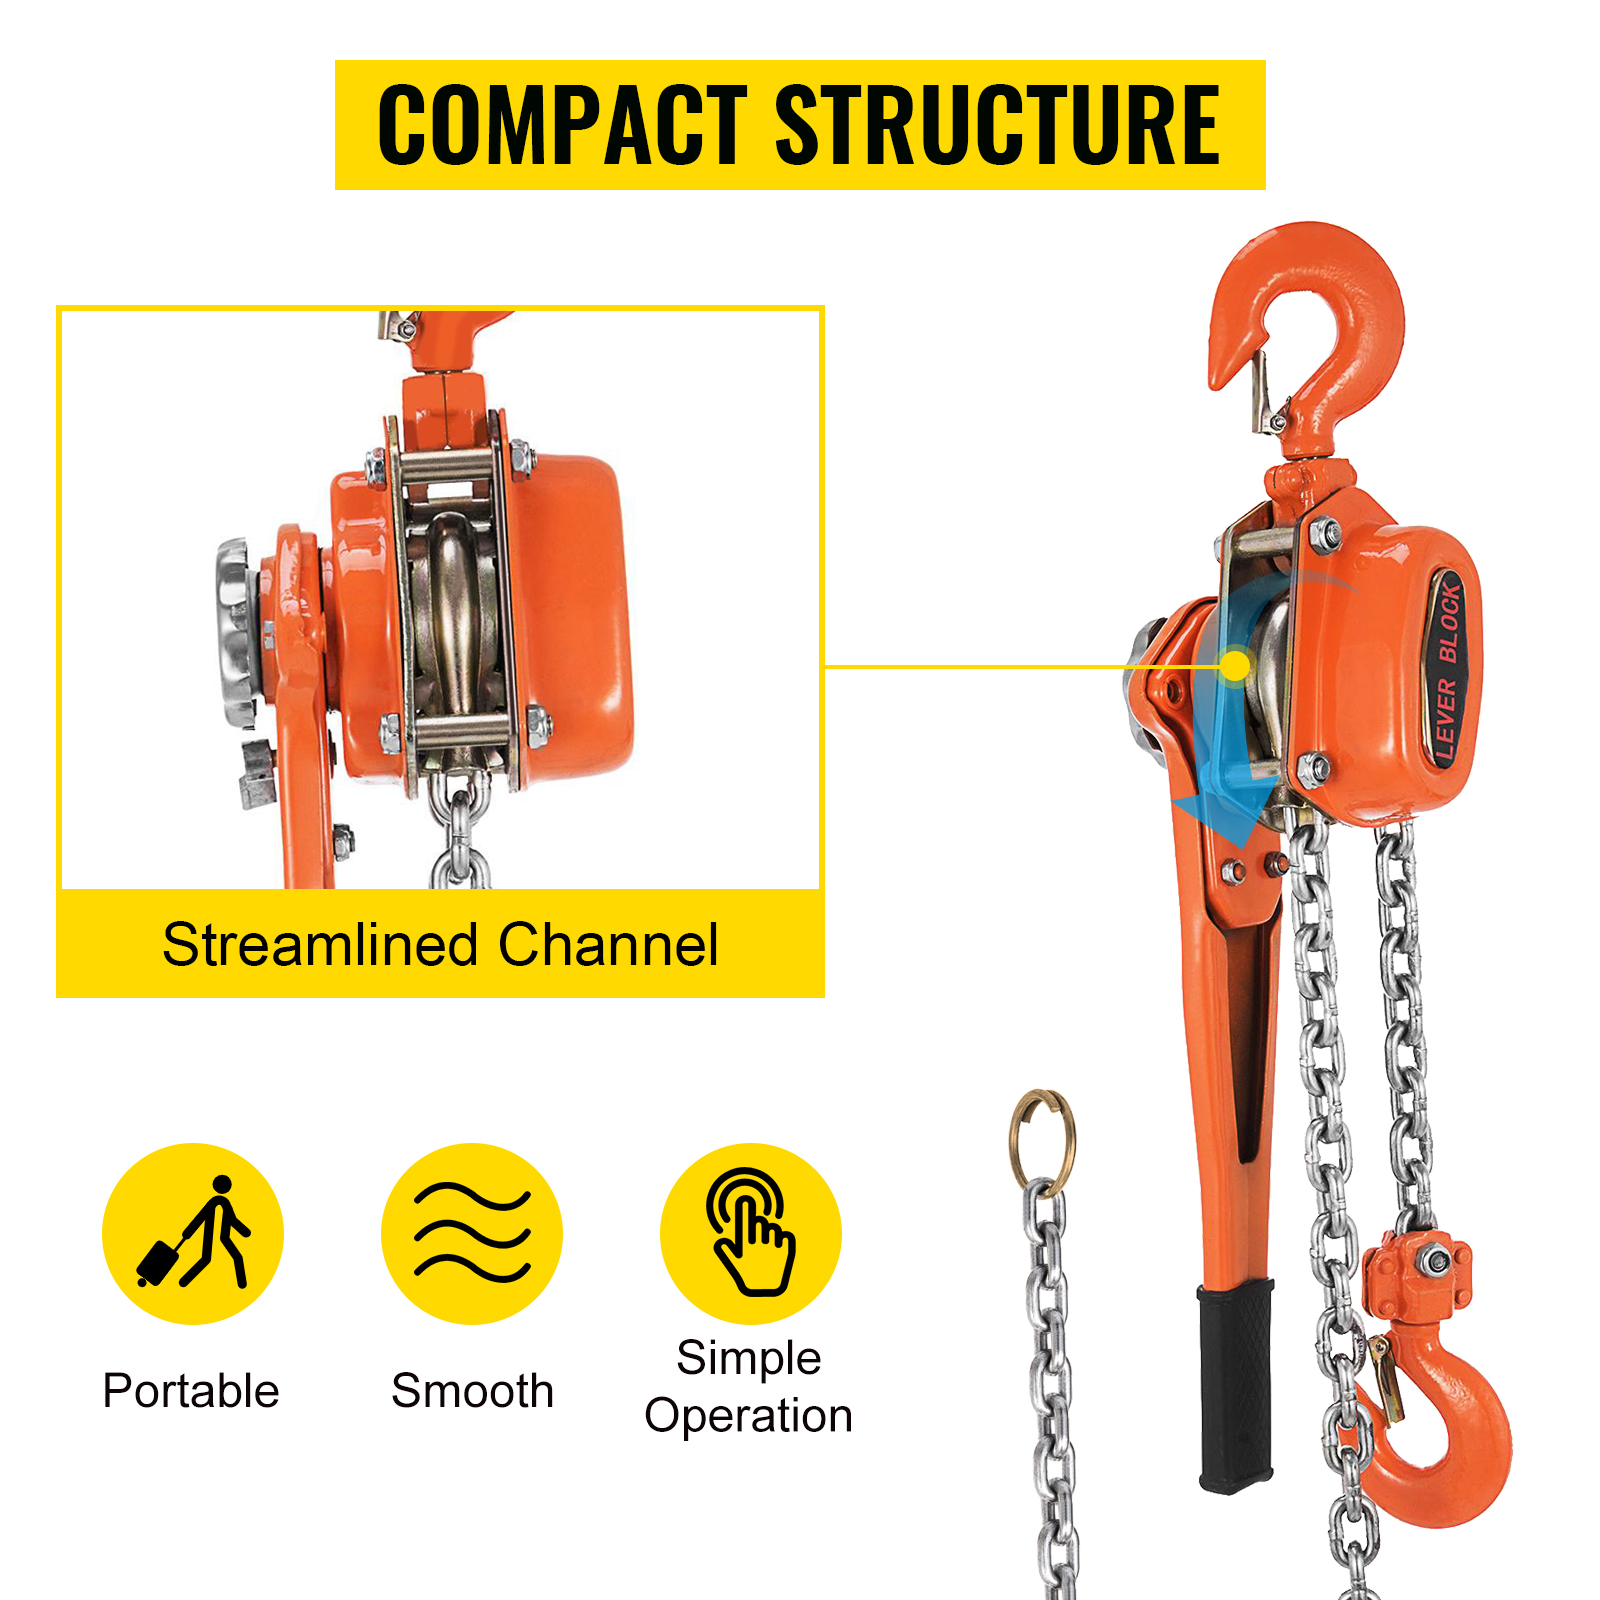 VEVOR Lever Chain Hoist, 0.75Ton 1650lbs Capacity Ratchet Puller with 10FT  Max. Lifting Height, Come Along Heavy Duty Steel Hooks, Manual Handling  Tool for Cargo Moving in Construction, Warehouse VEVOR US